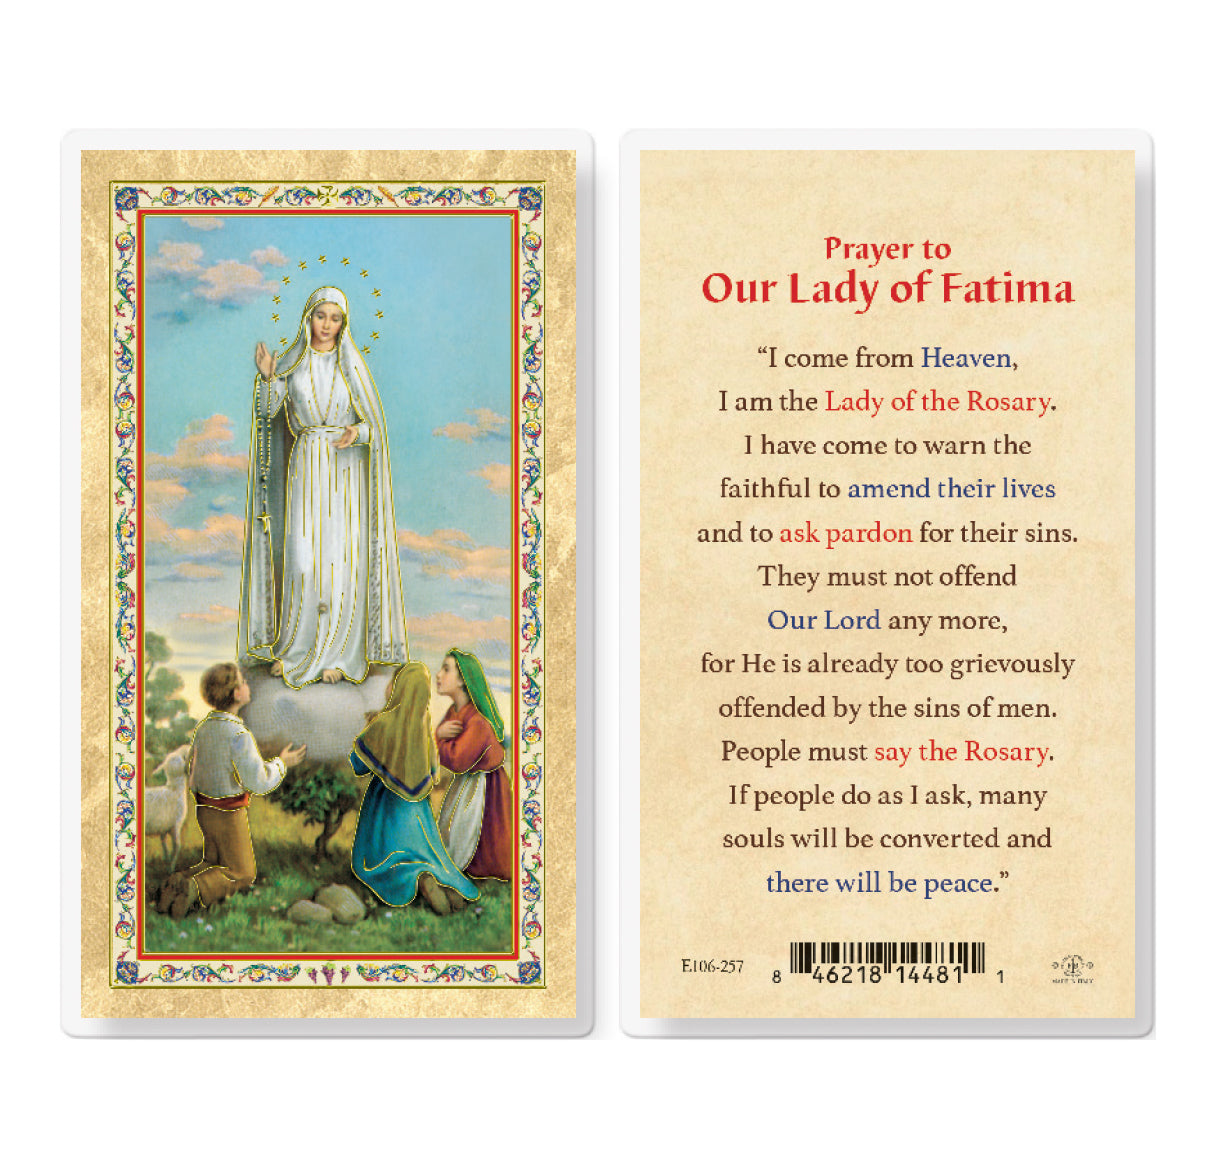 Prayer to Our Lady of Fatima Gold-Stamped Laminated Catholic Prayer Holy Card with Prayer on Back, Pack of 25